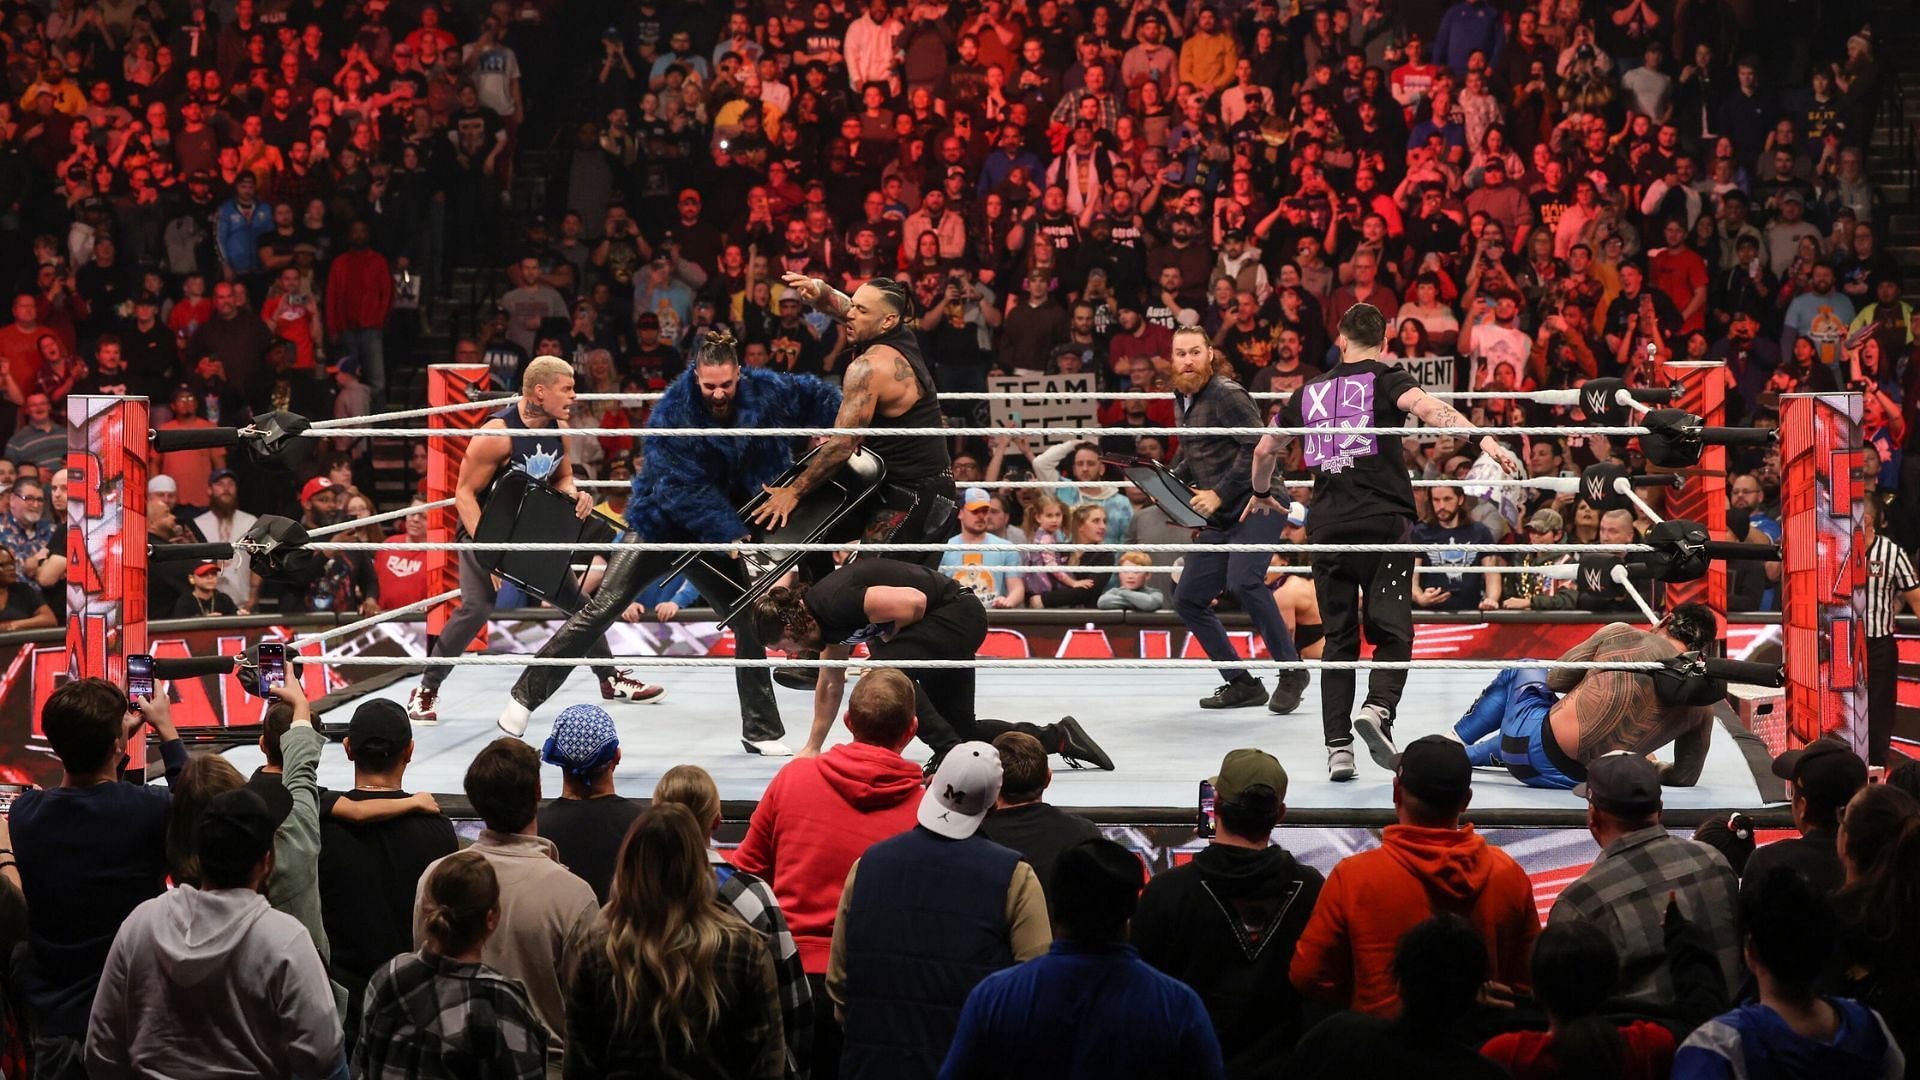 RAW will air live from the Allstate Arena in Chicago tonight.